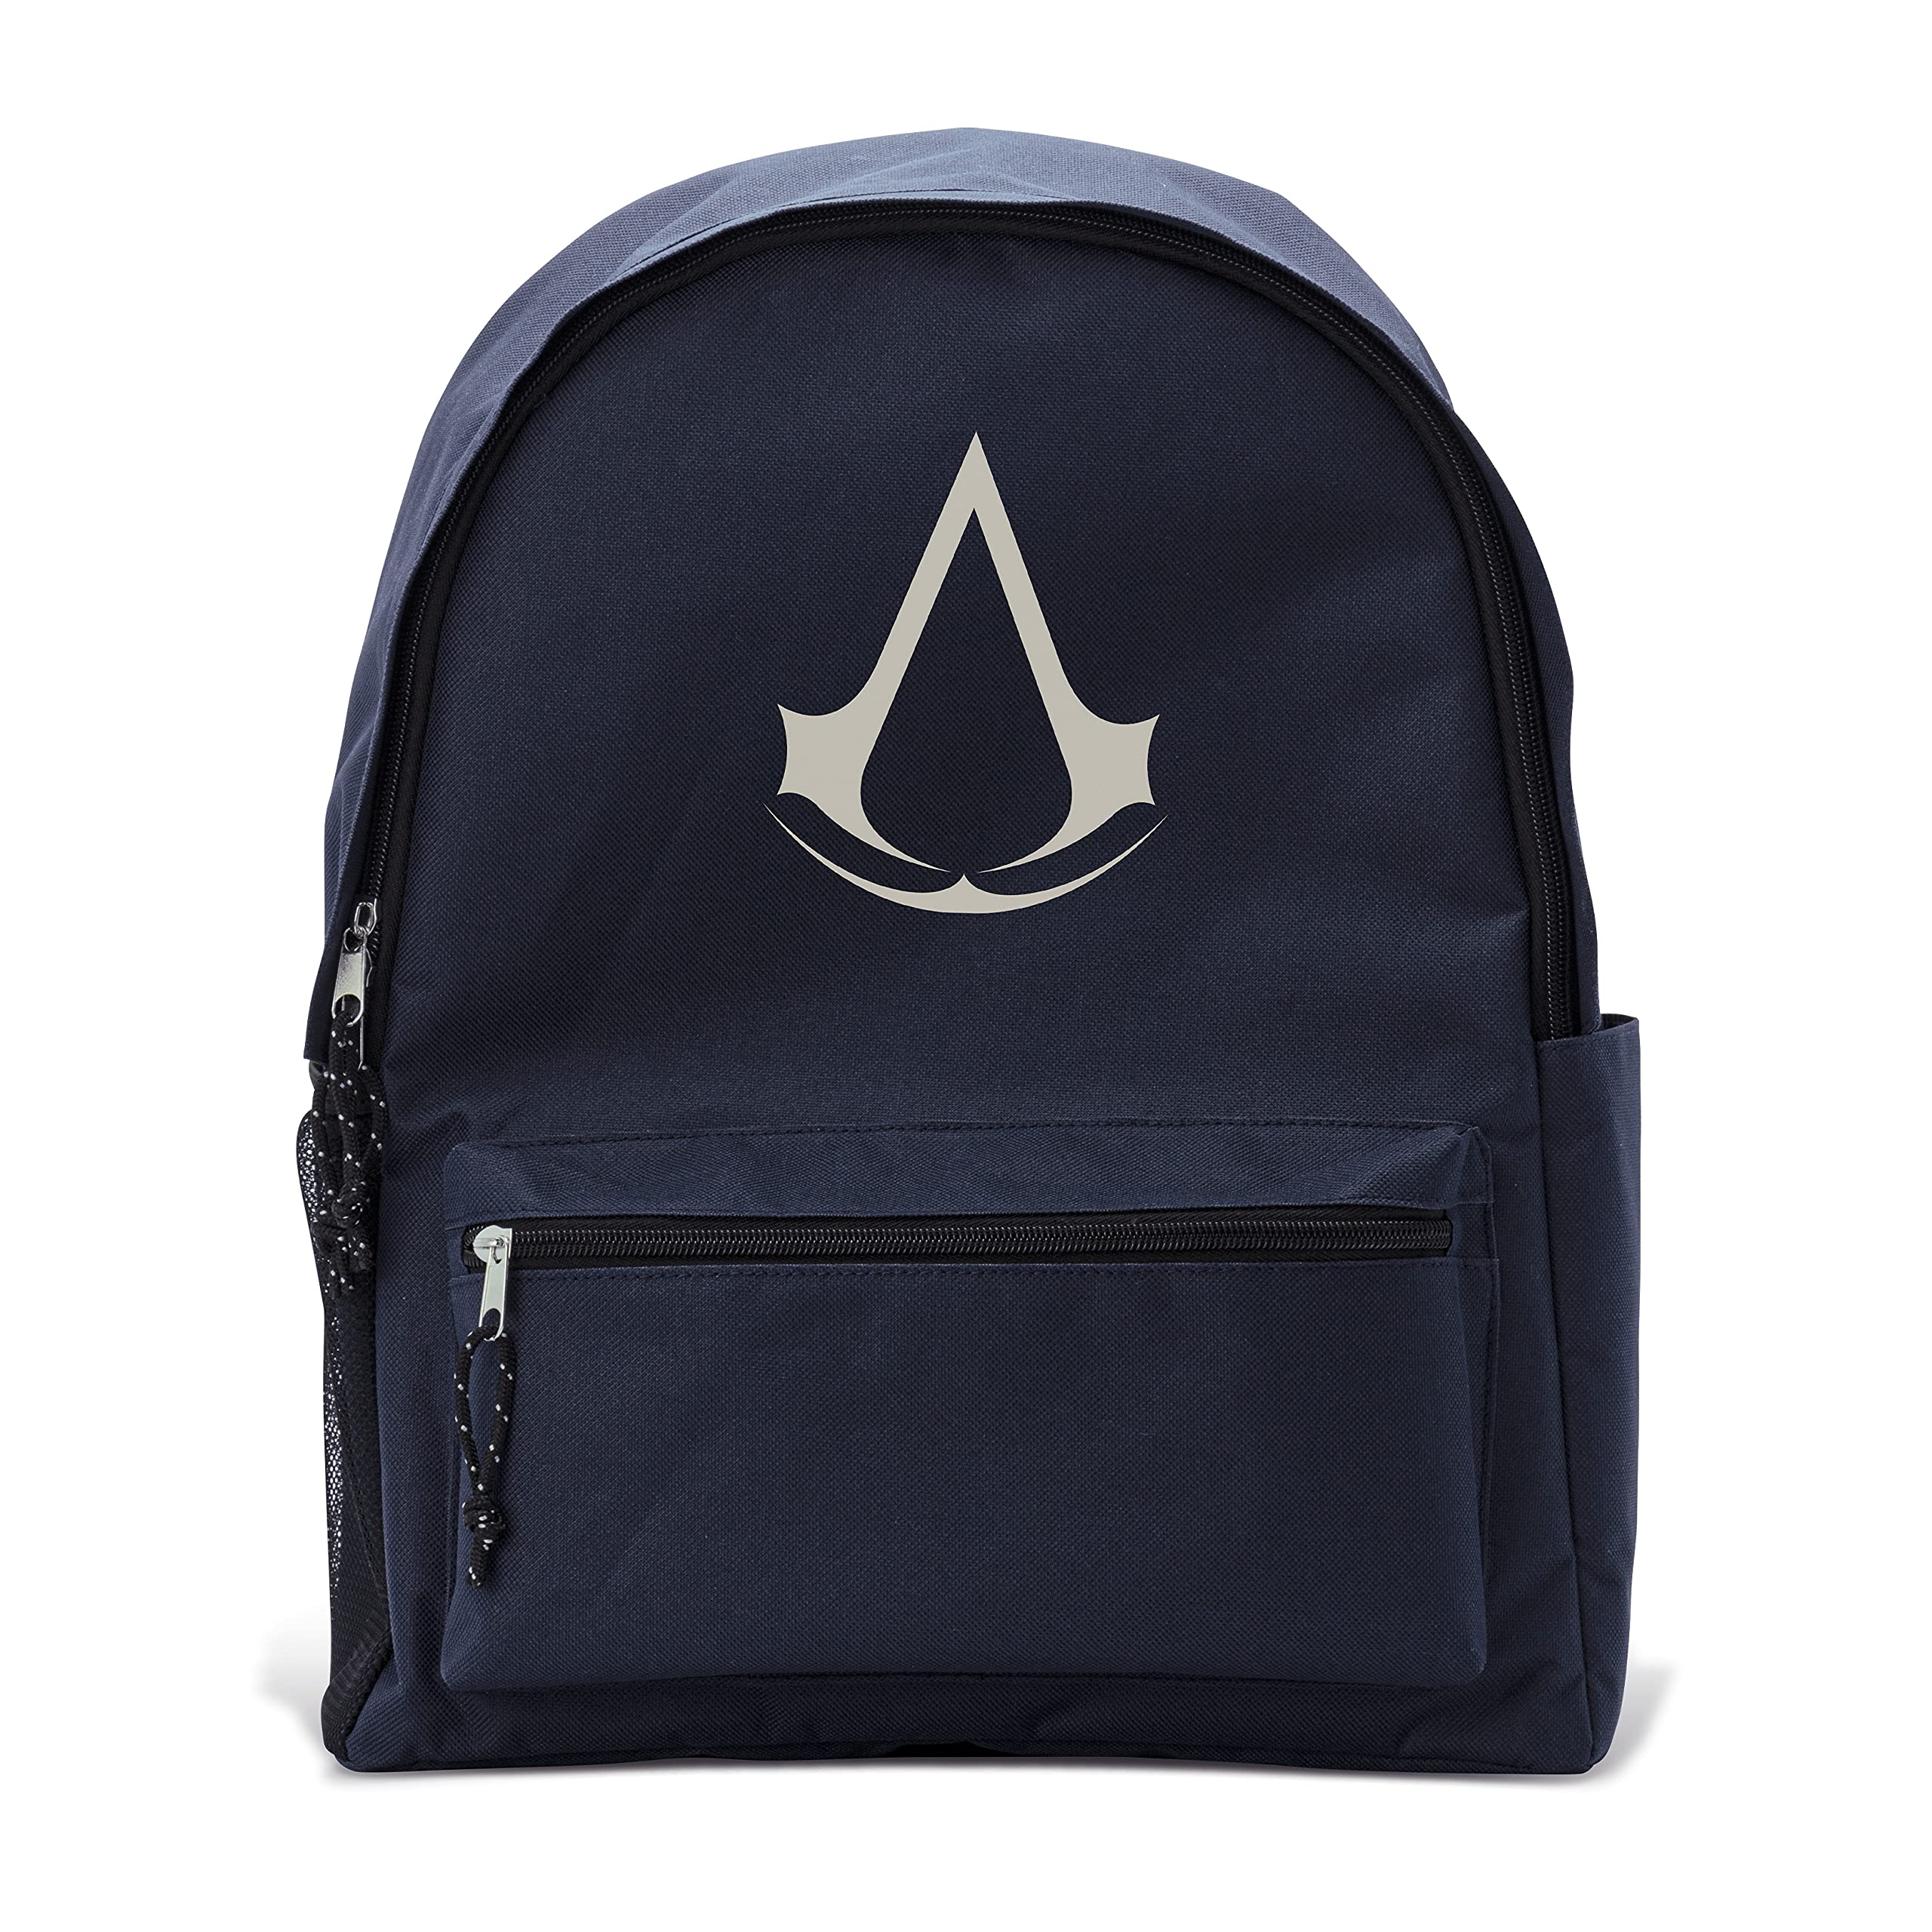 ABYstyle - Assassin's Creed - Rucksack - Crest - Blau (45x31x19 cm)